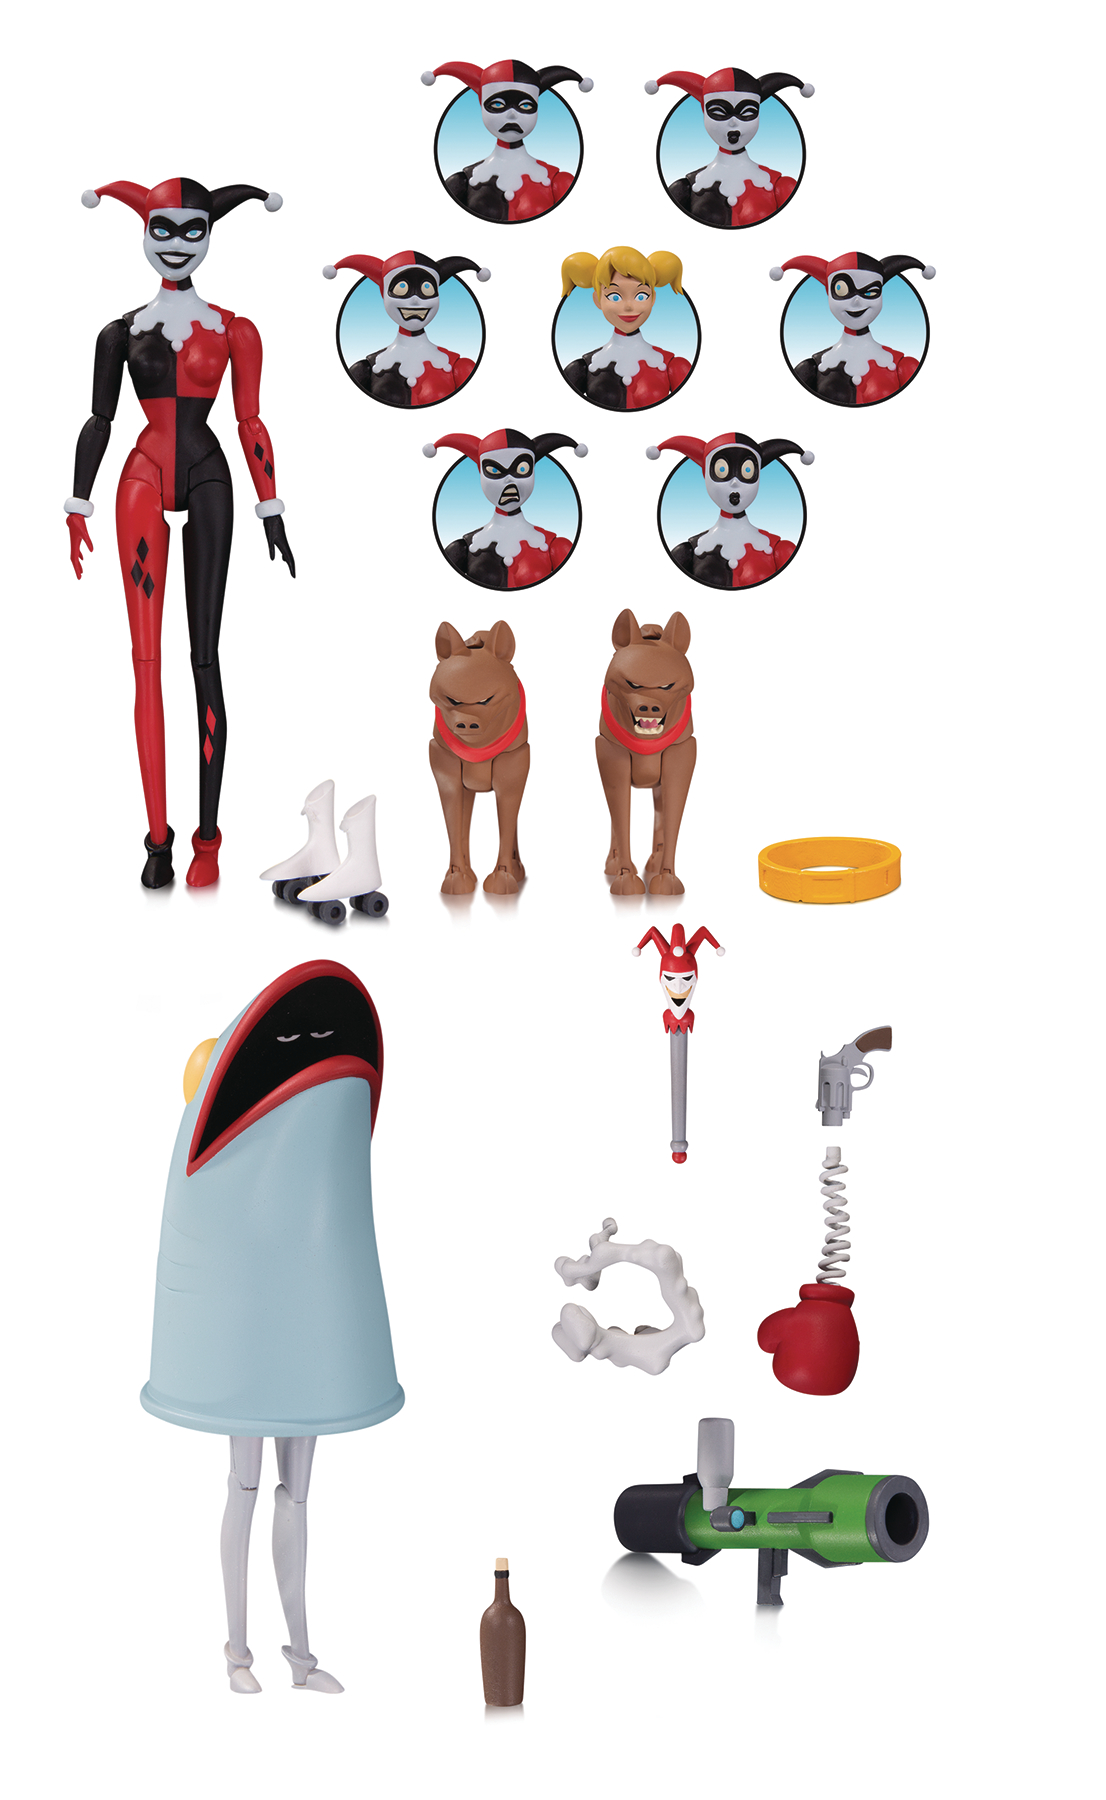 batman the animated series harley quinn expressions pack